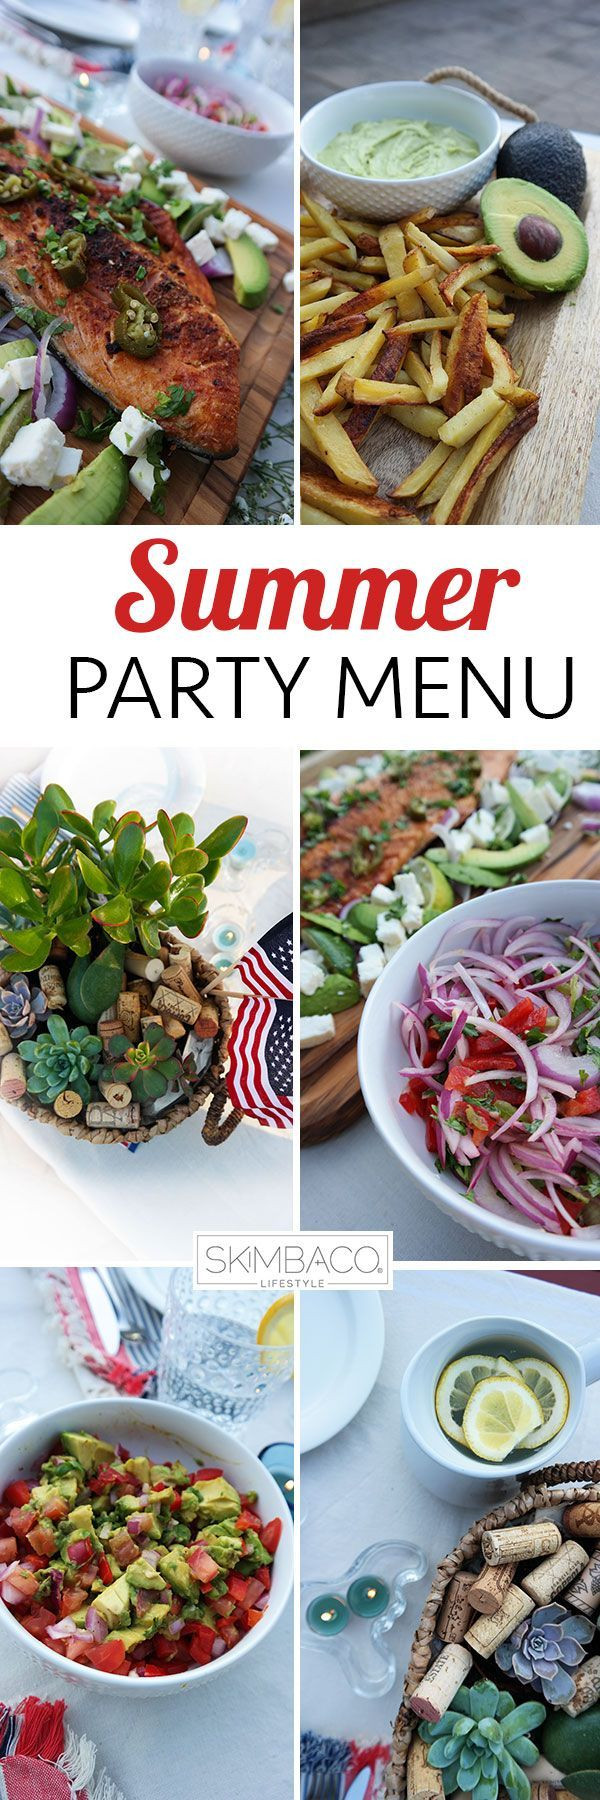 Summer Party Dinner Menu Ideas
 17 Best images about The Ultimate 4th of July on Pinterest